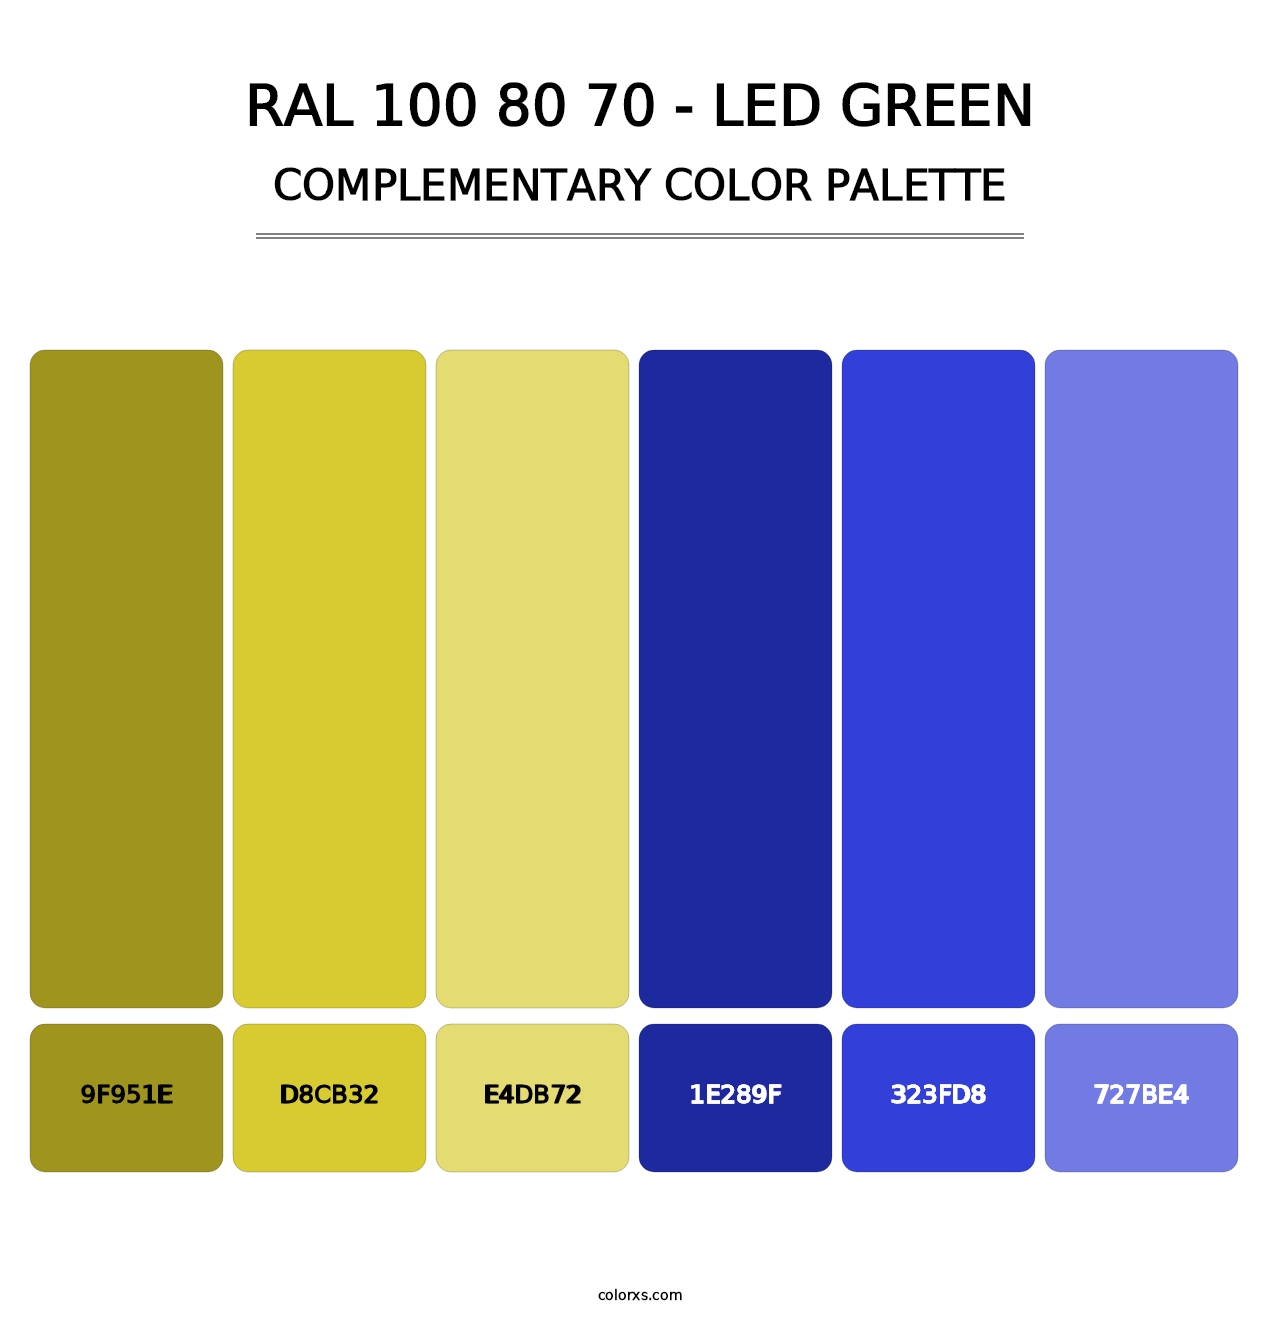 RAL 100 80 70 - LED Green - Complementary Color Palette